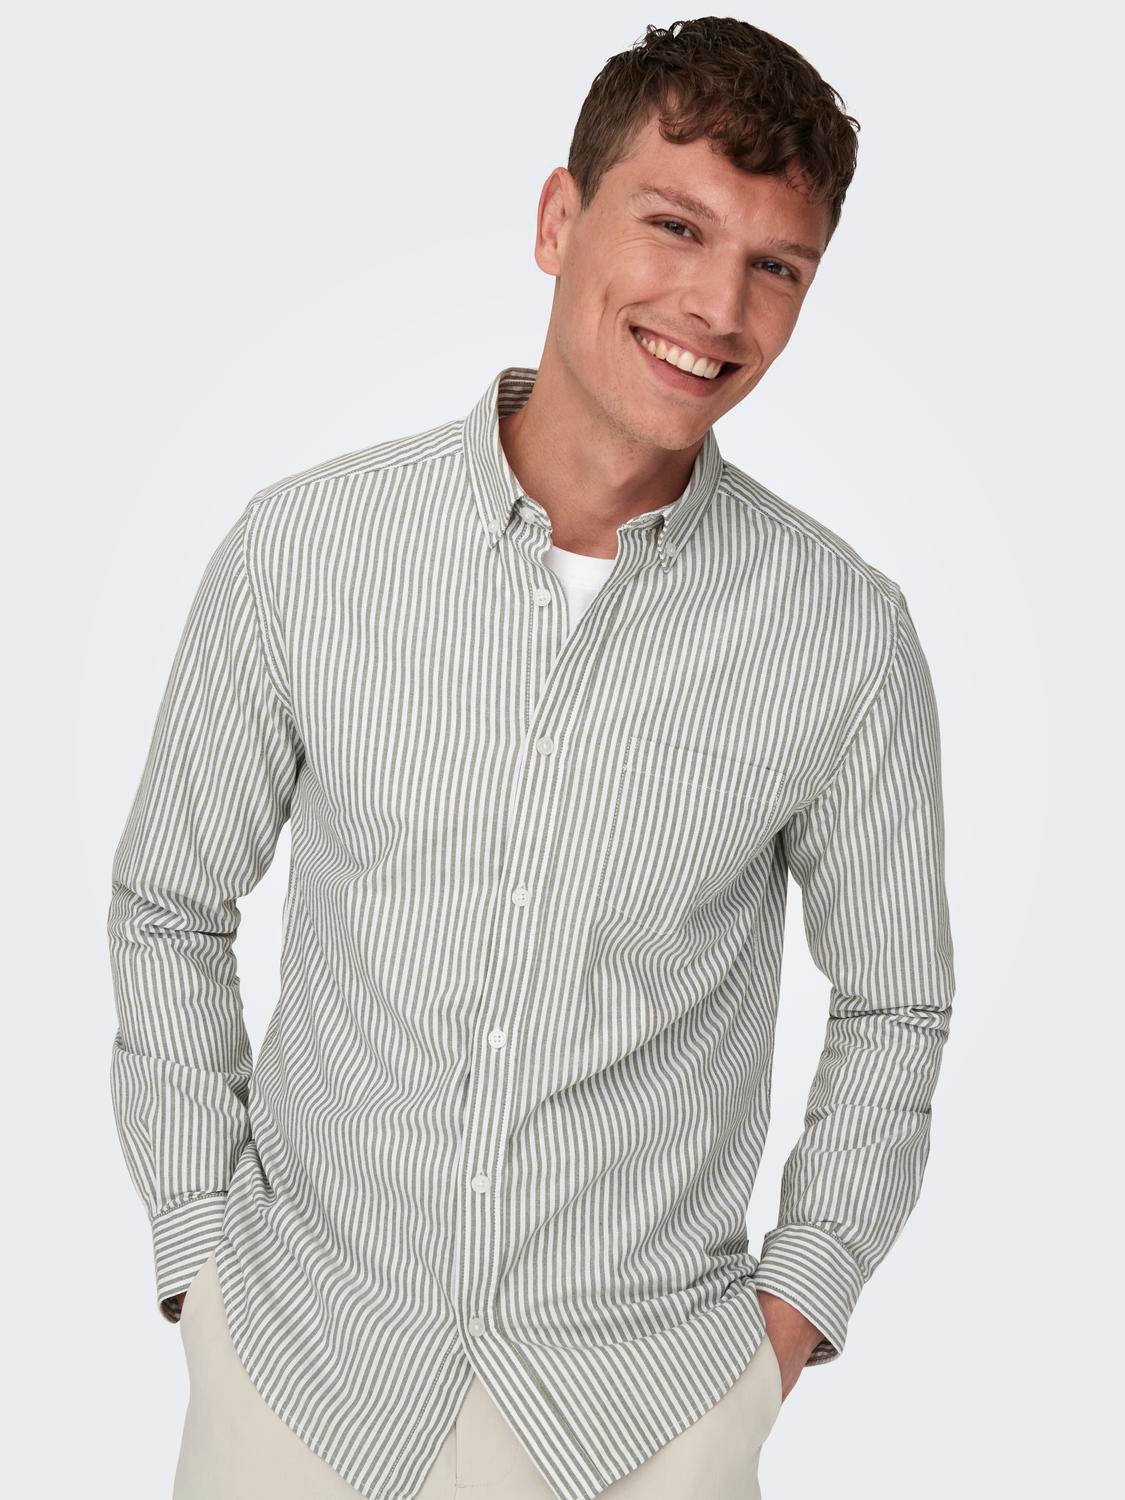 ONLY & SONS Slim Fit Striped shirt -Winter Moss - 22023977